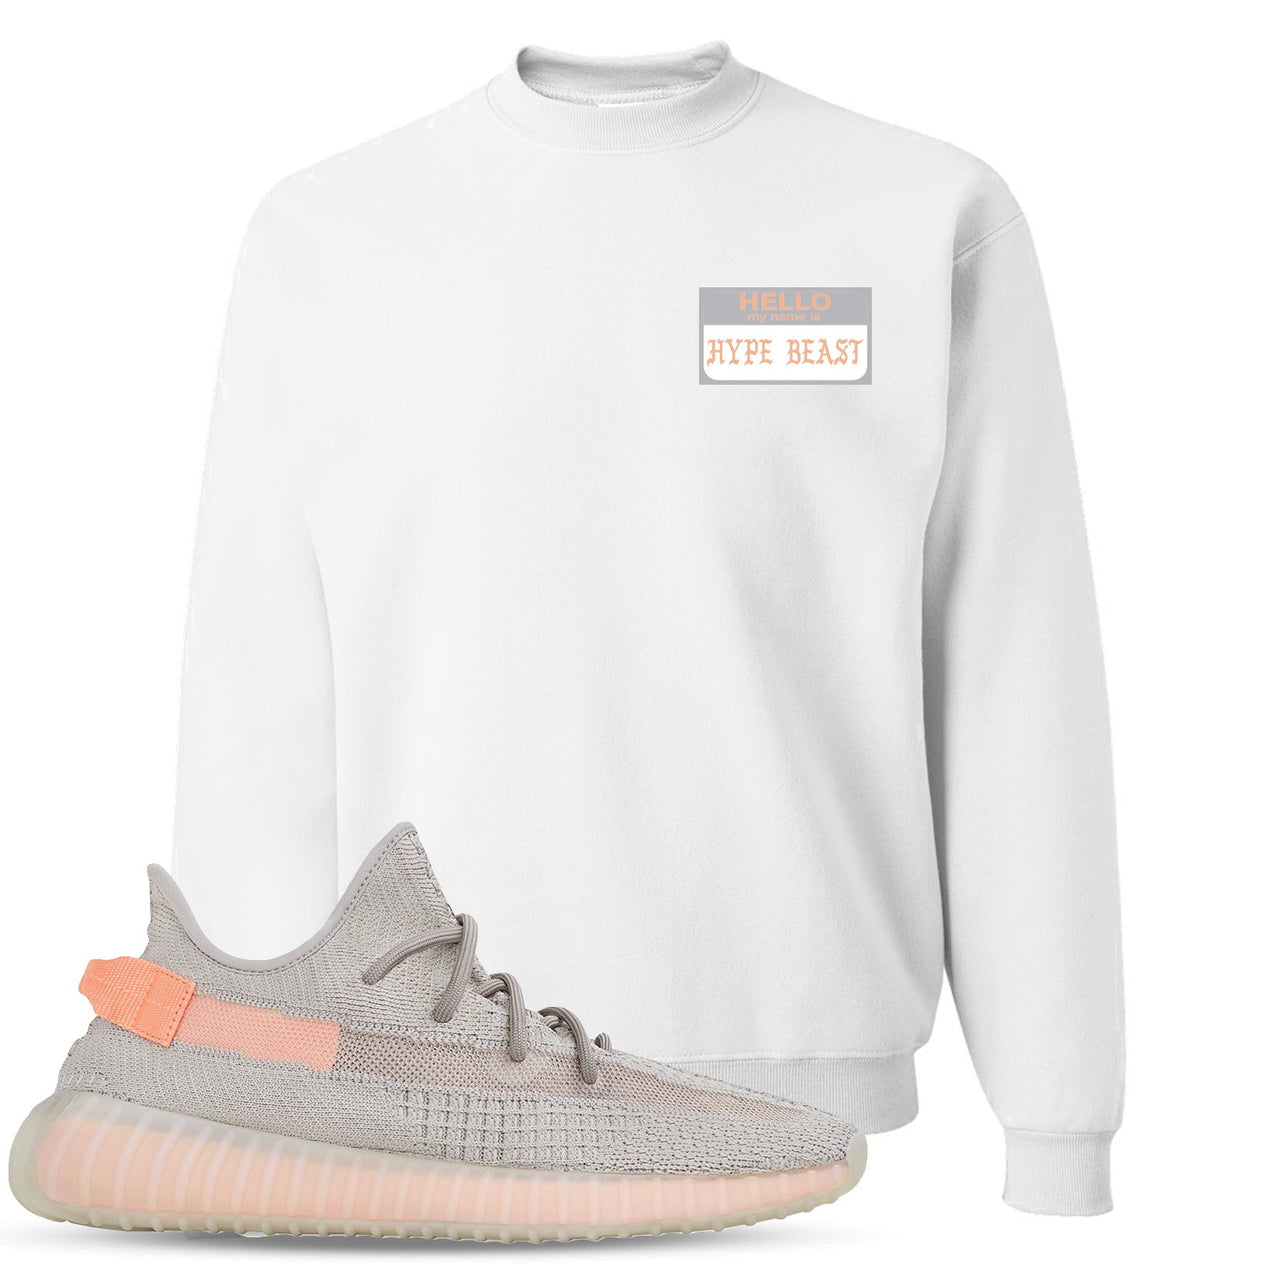 True Form v2 350s Crewneck Sweater | Hello My Name Is Hype Beast Pablo, White